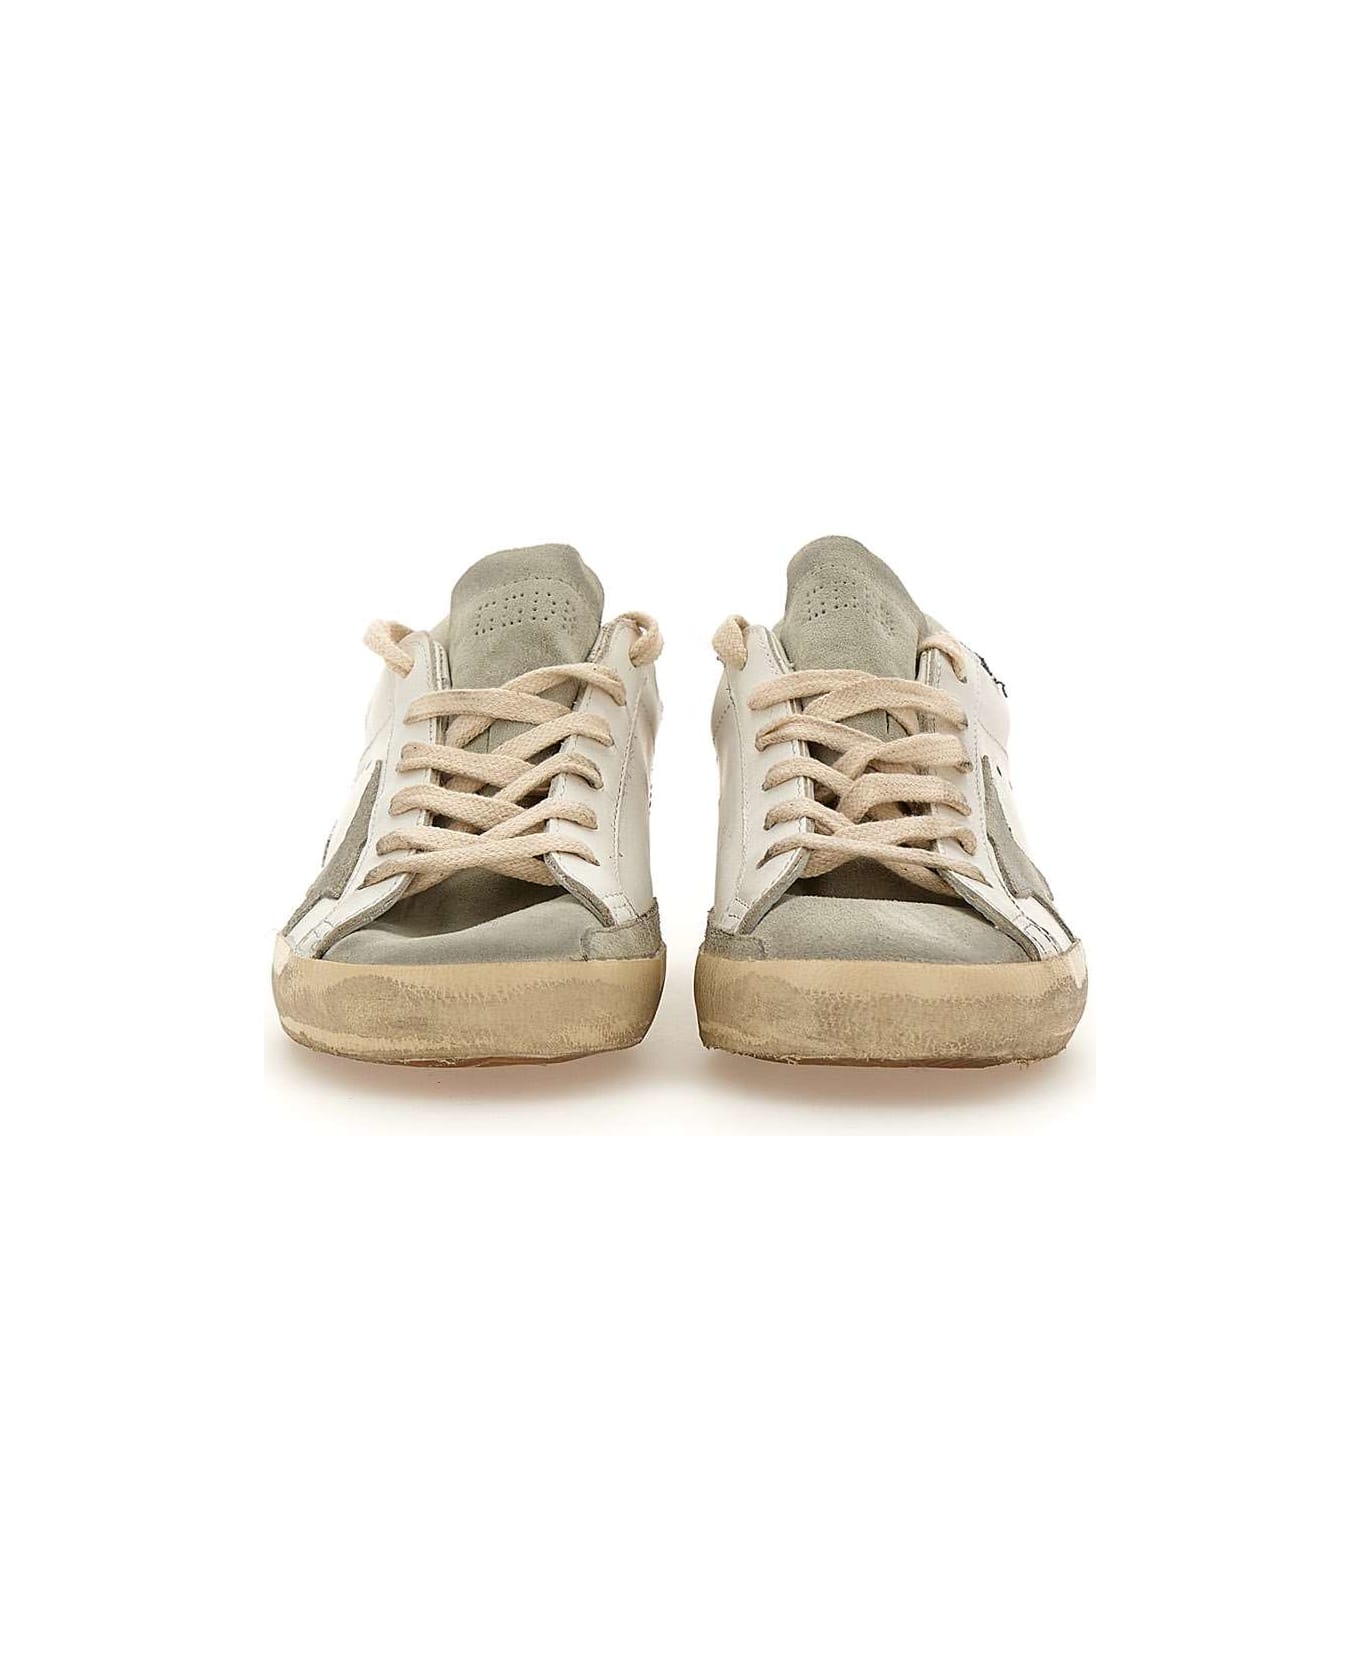 Golden Goose Super Star Classic Leather Sneakers - White/ice/grey スニーカー